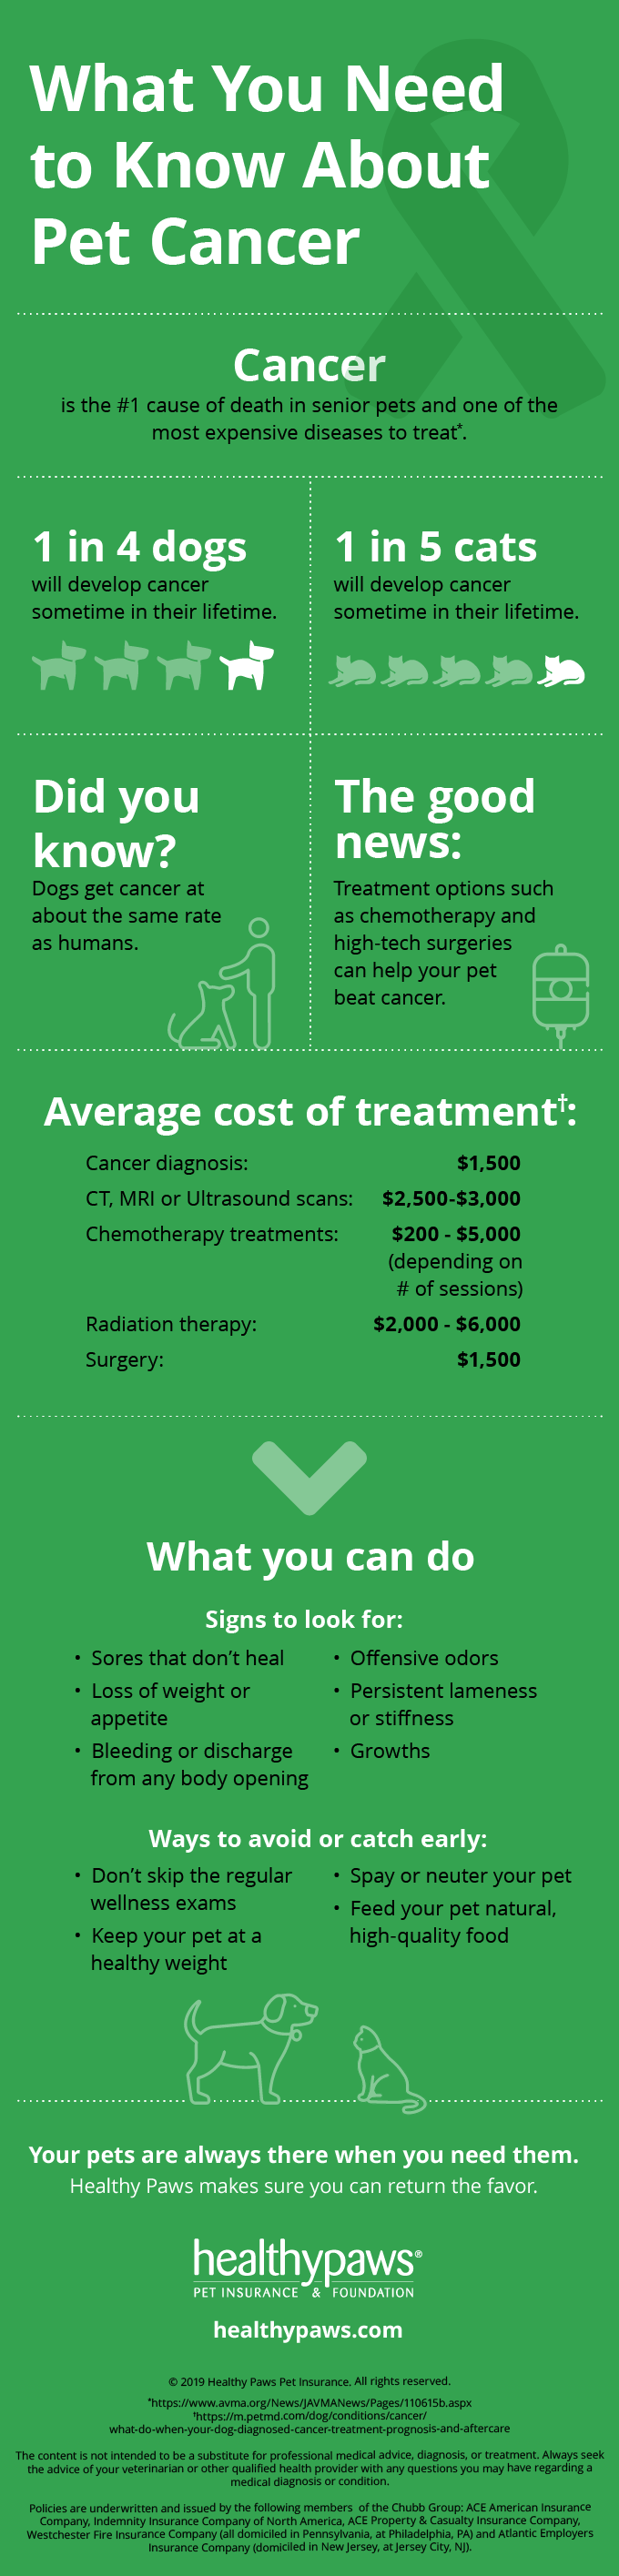 Infographic about pet cancer.